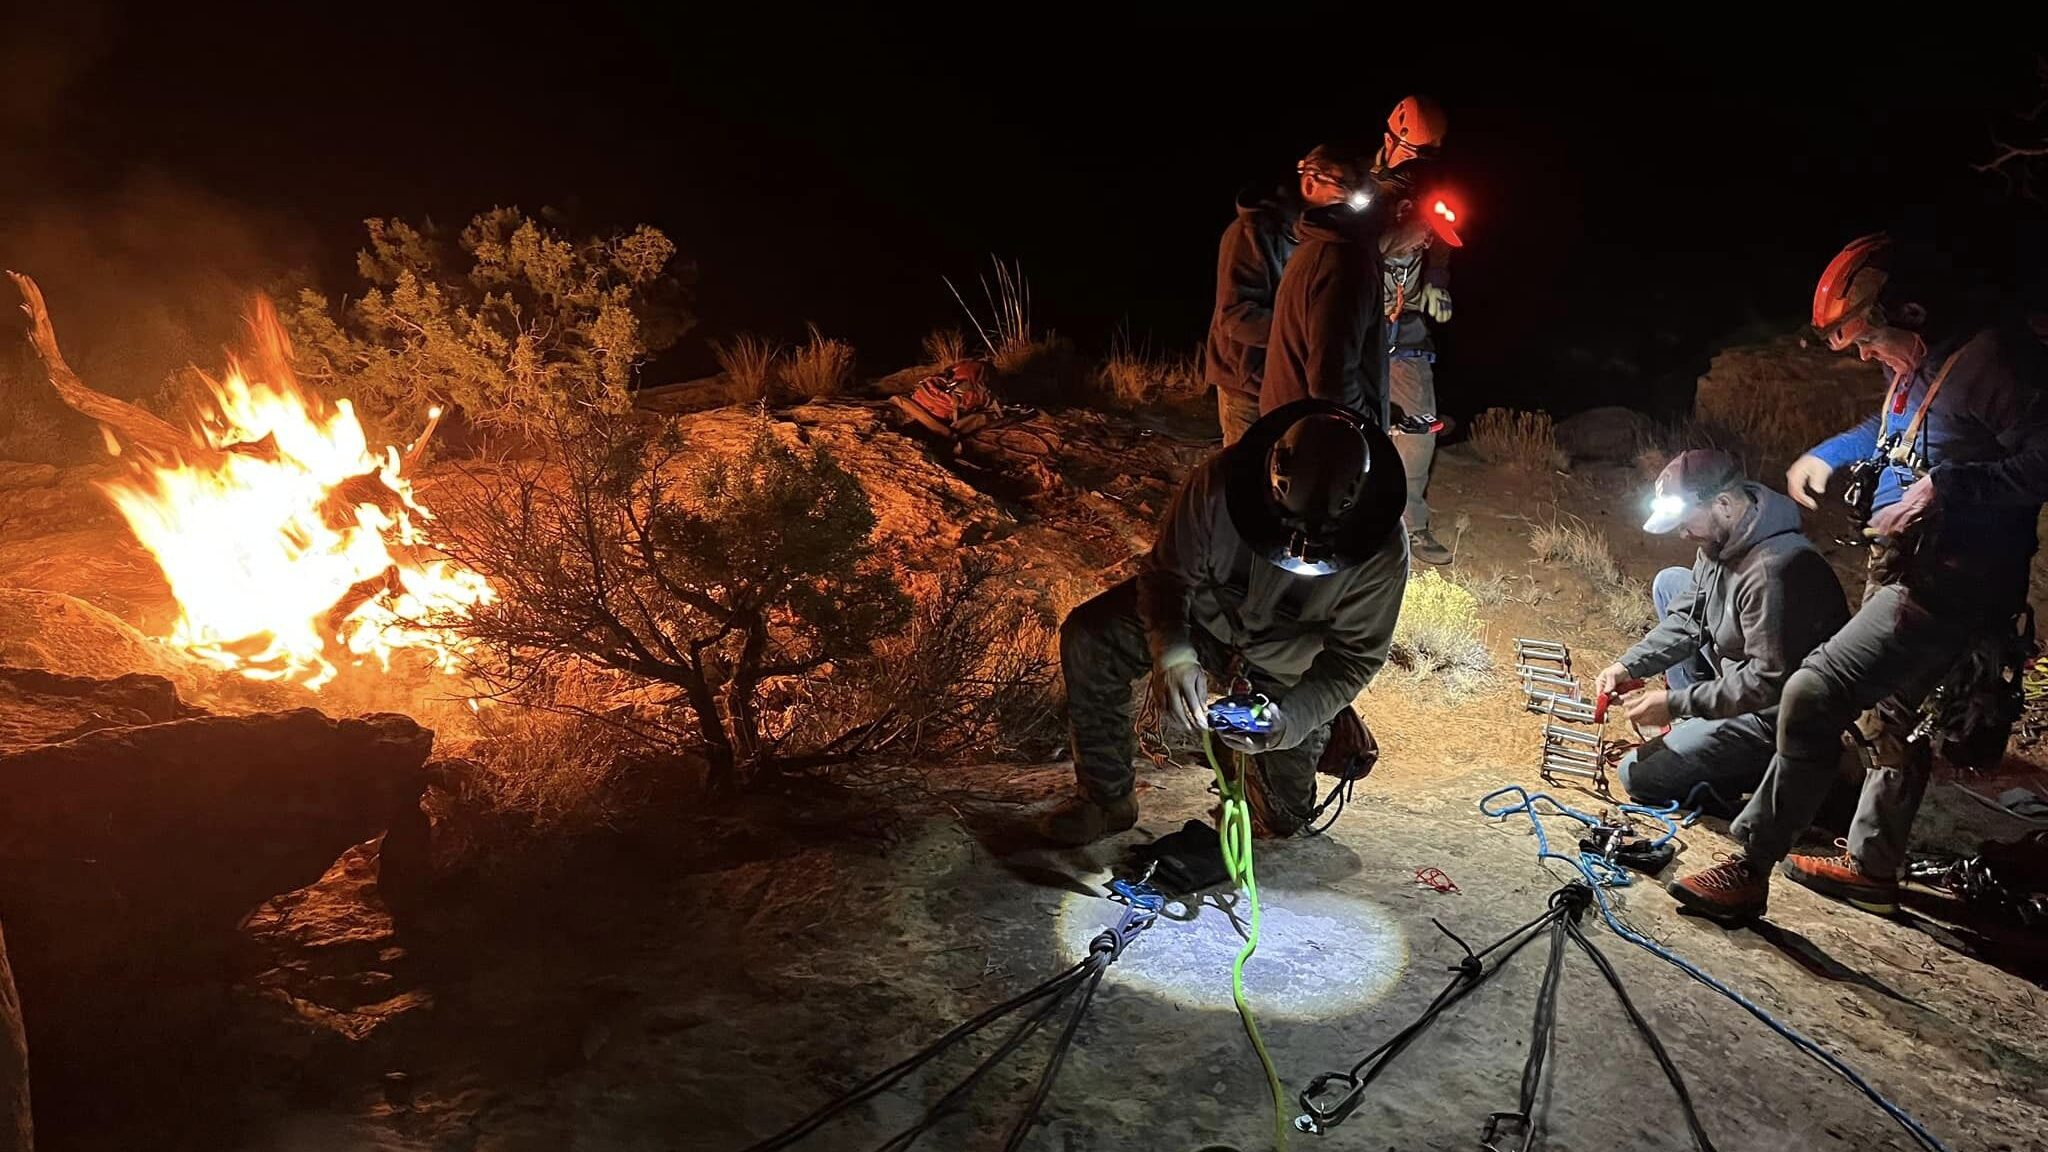 San Juan County Search and Rescue responded to a call in which a male climber was stuck after slipp...